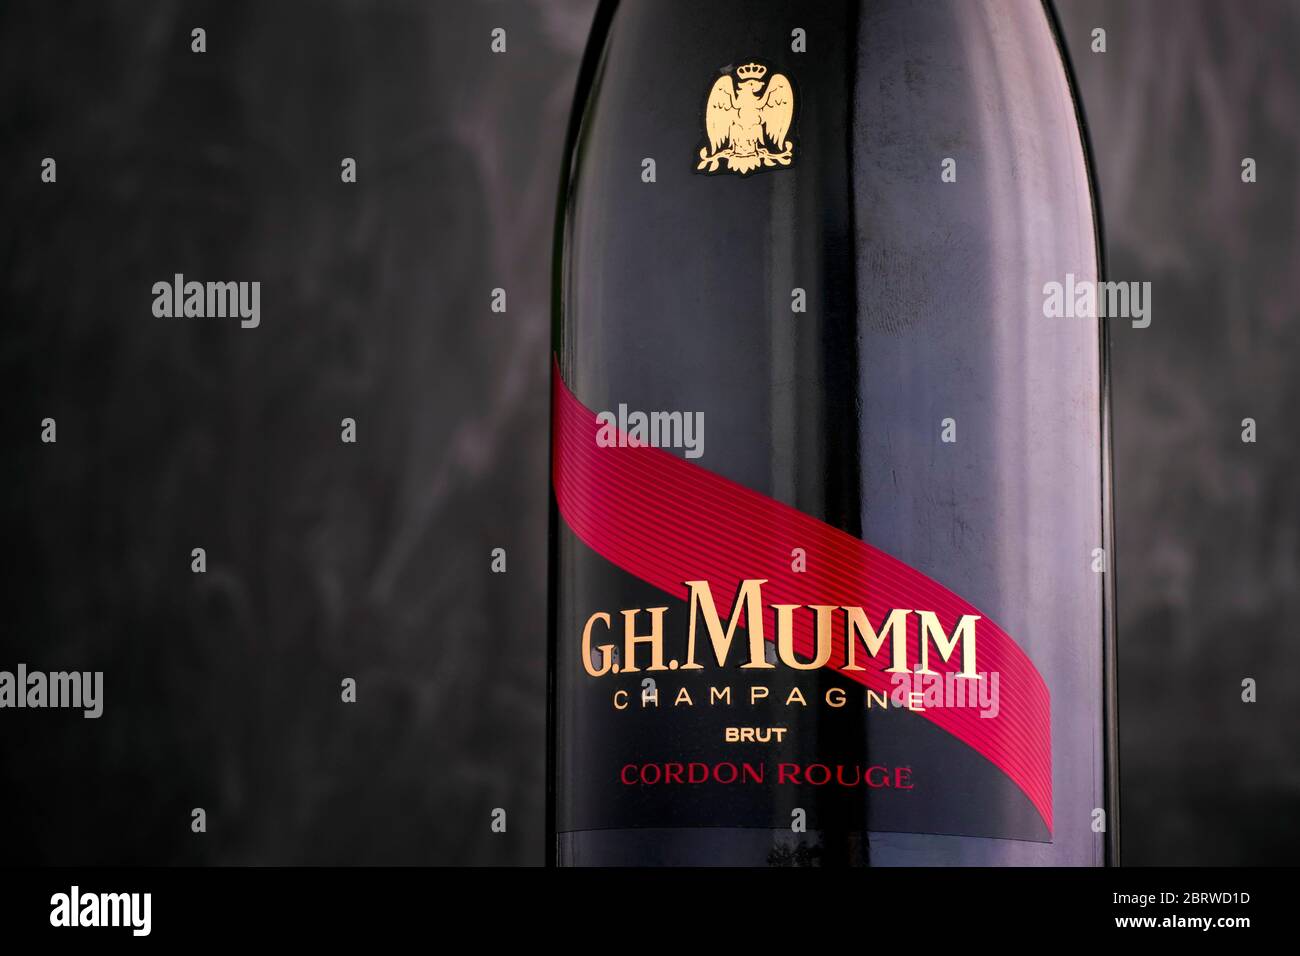 Tambov, Russian Federation - September 07, 2019 Close-up of Champagne G.H. Mumm bottle against black background. Stock Photo